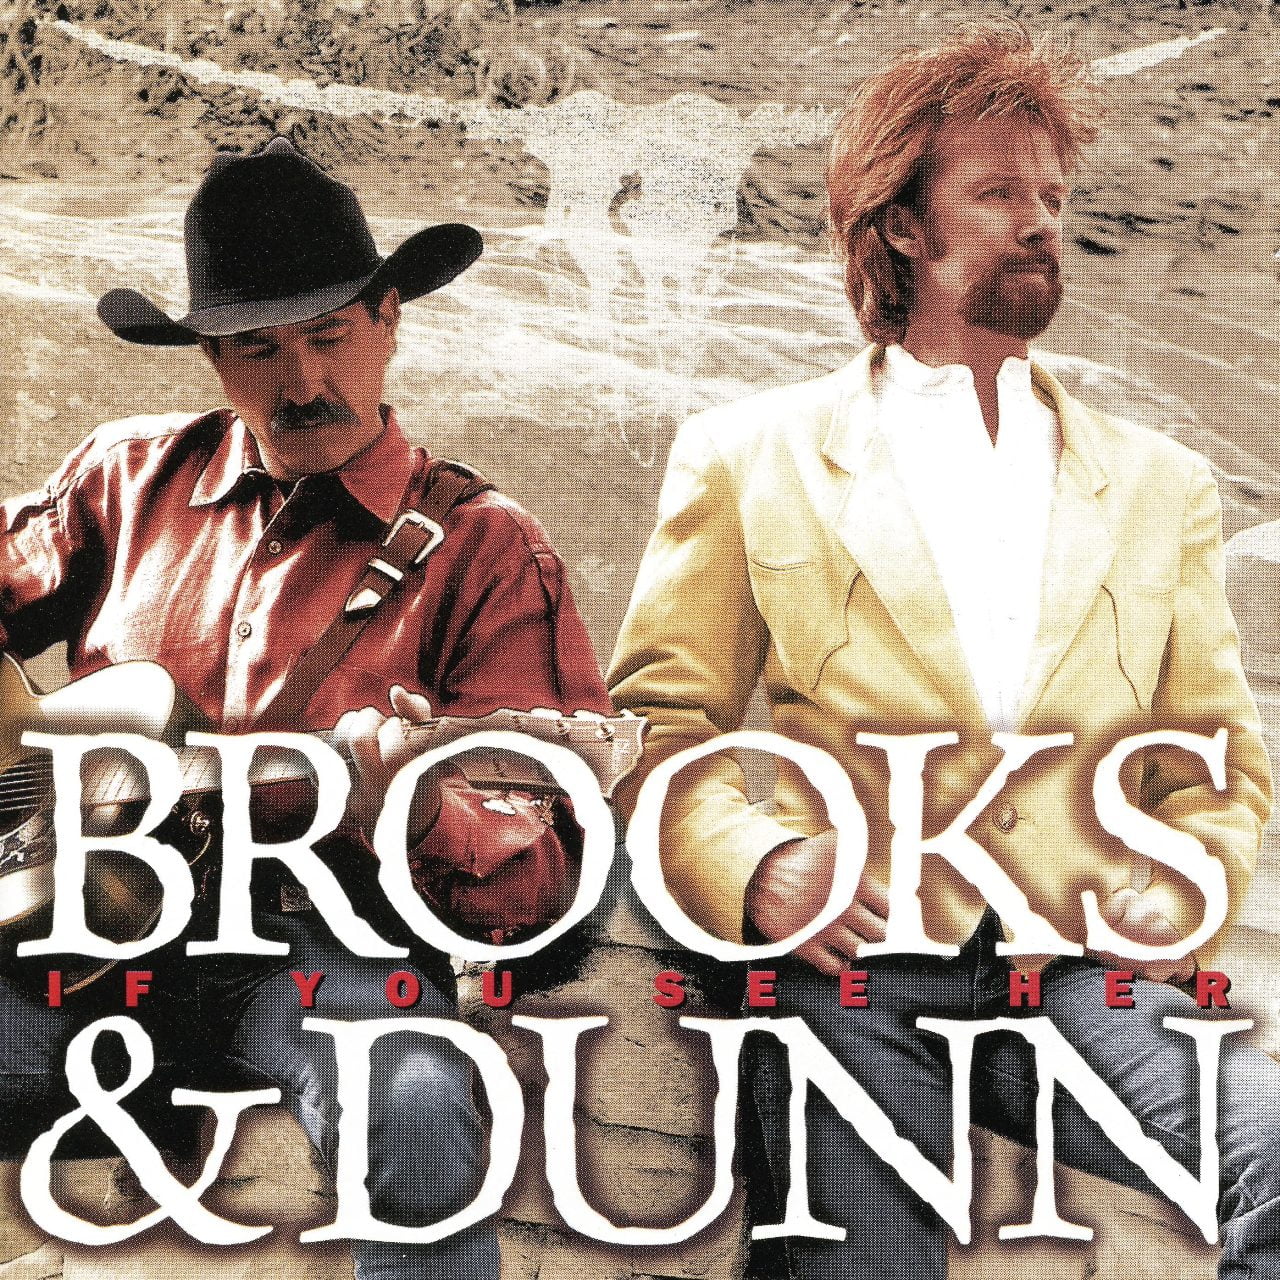 Brooks & Dunn – If You See Her cover album